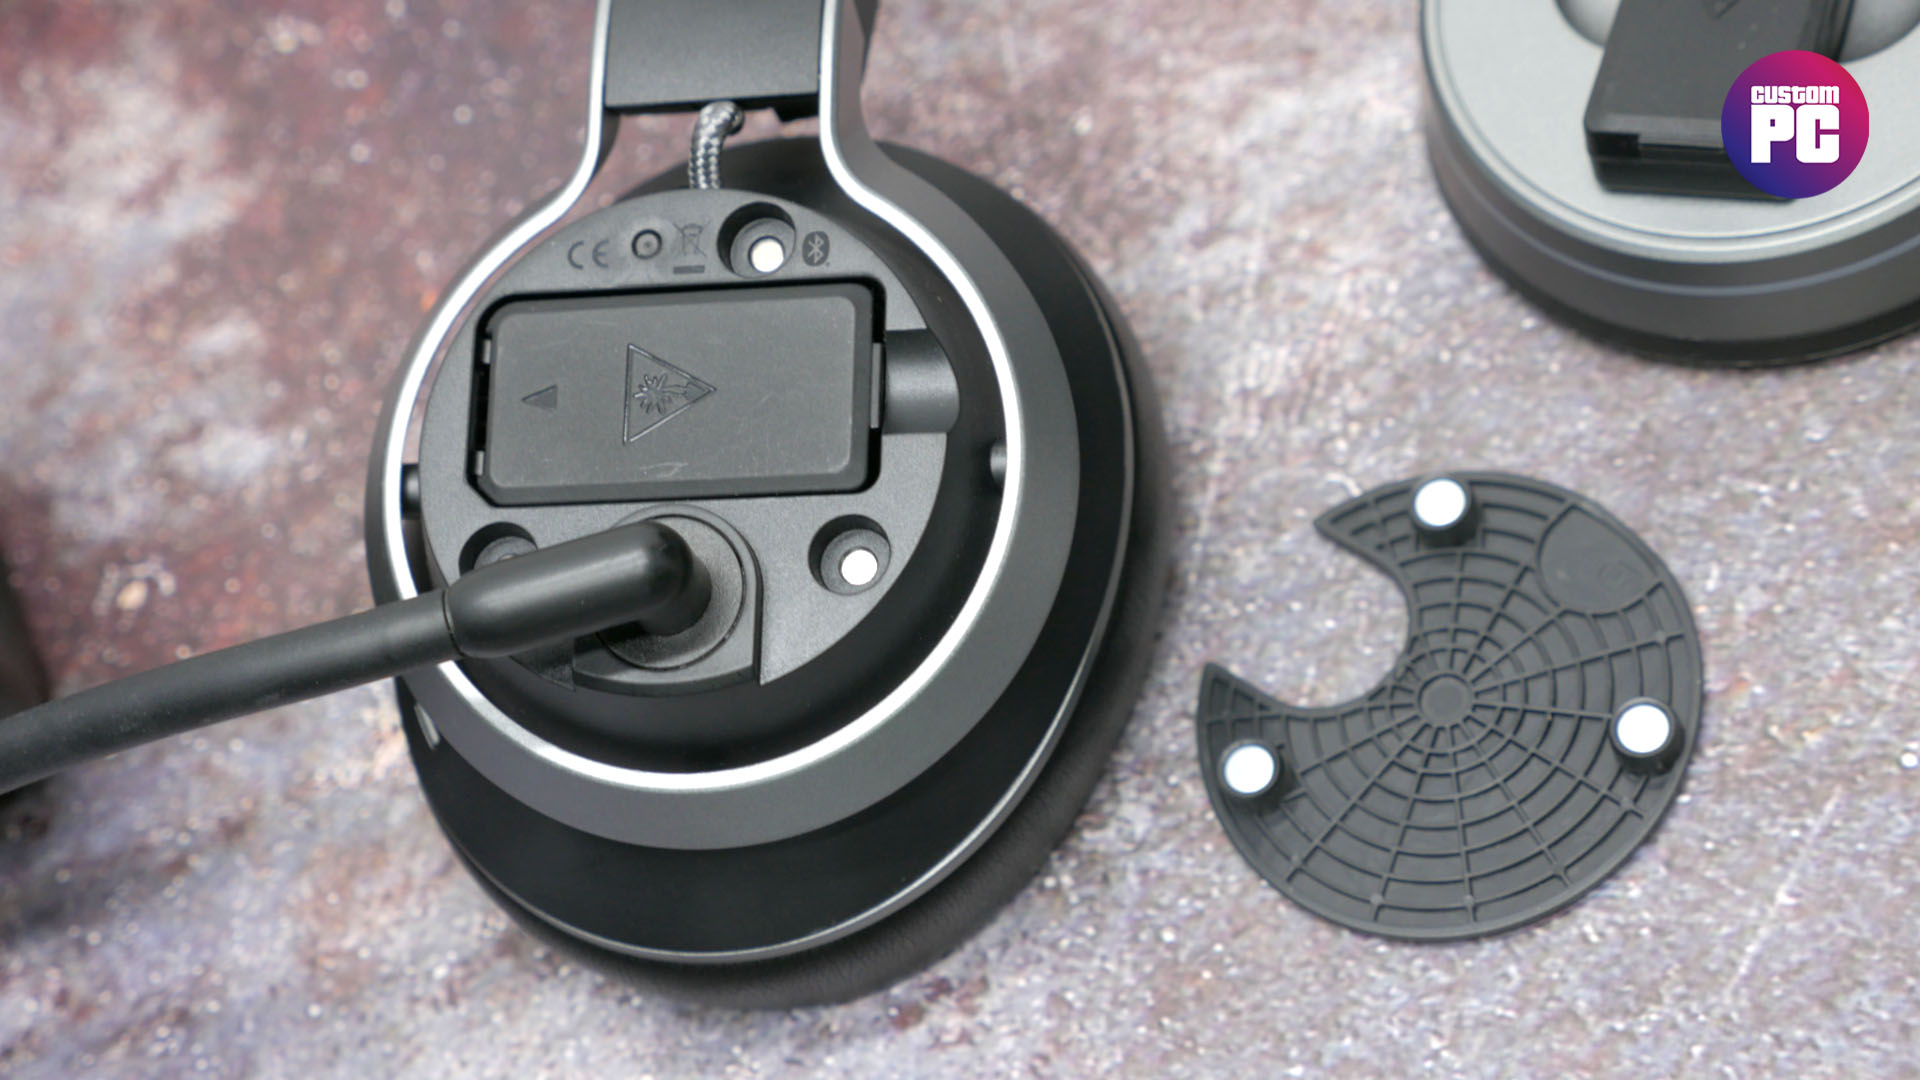 Turtle Beach Stealth Pro review 04 battery